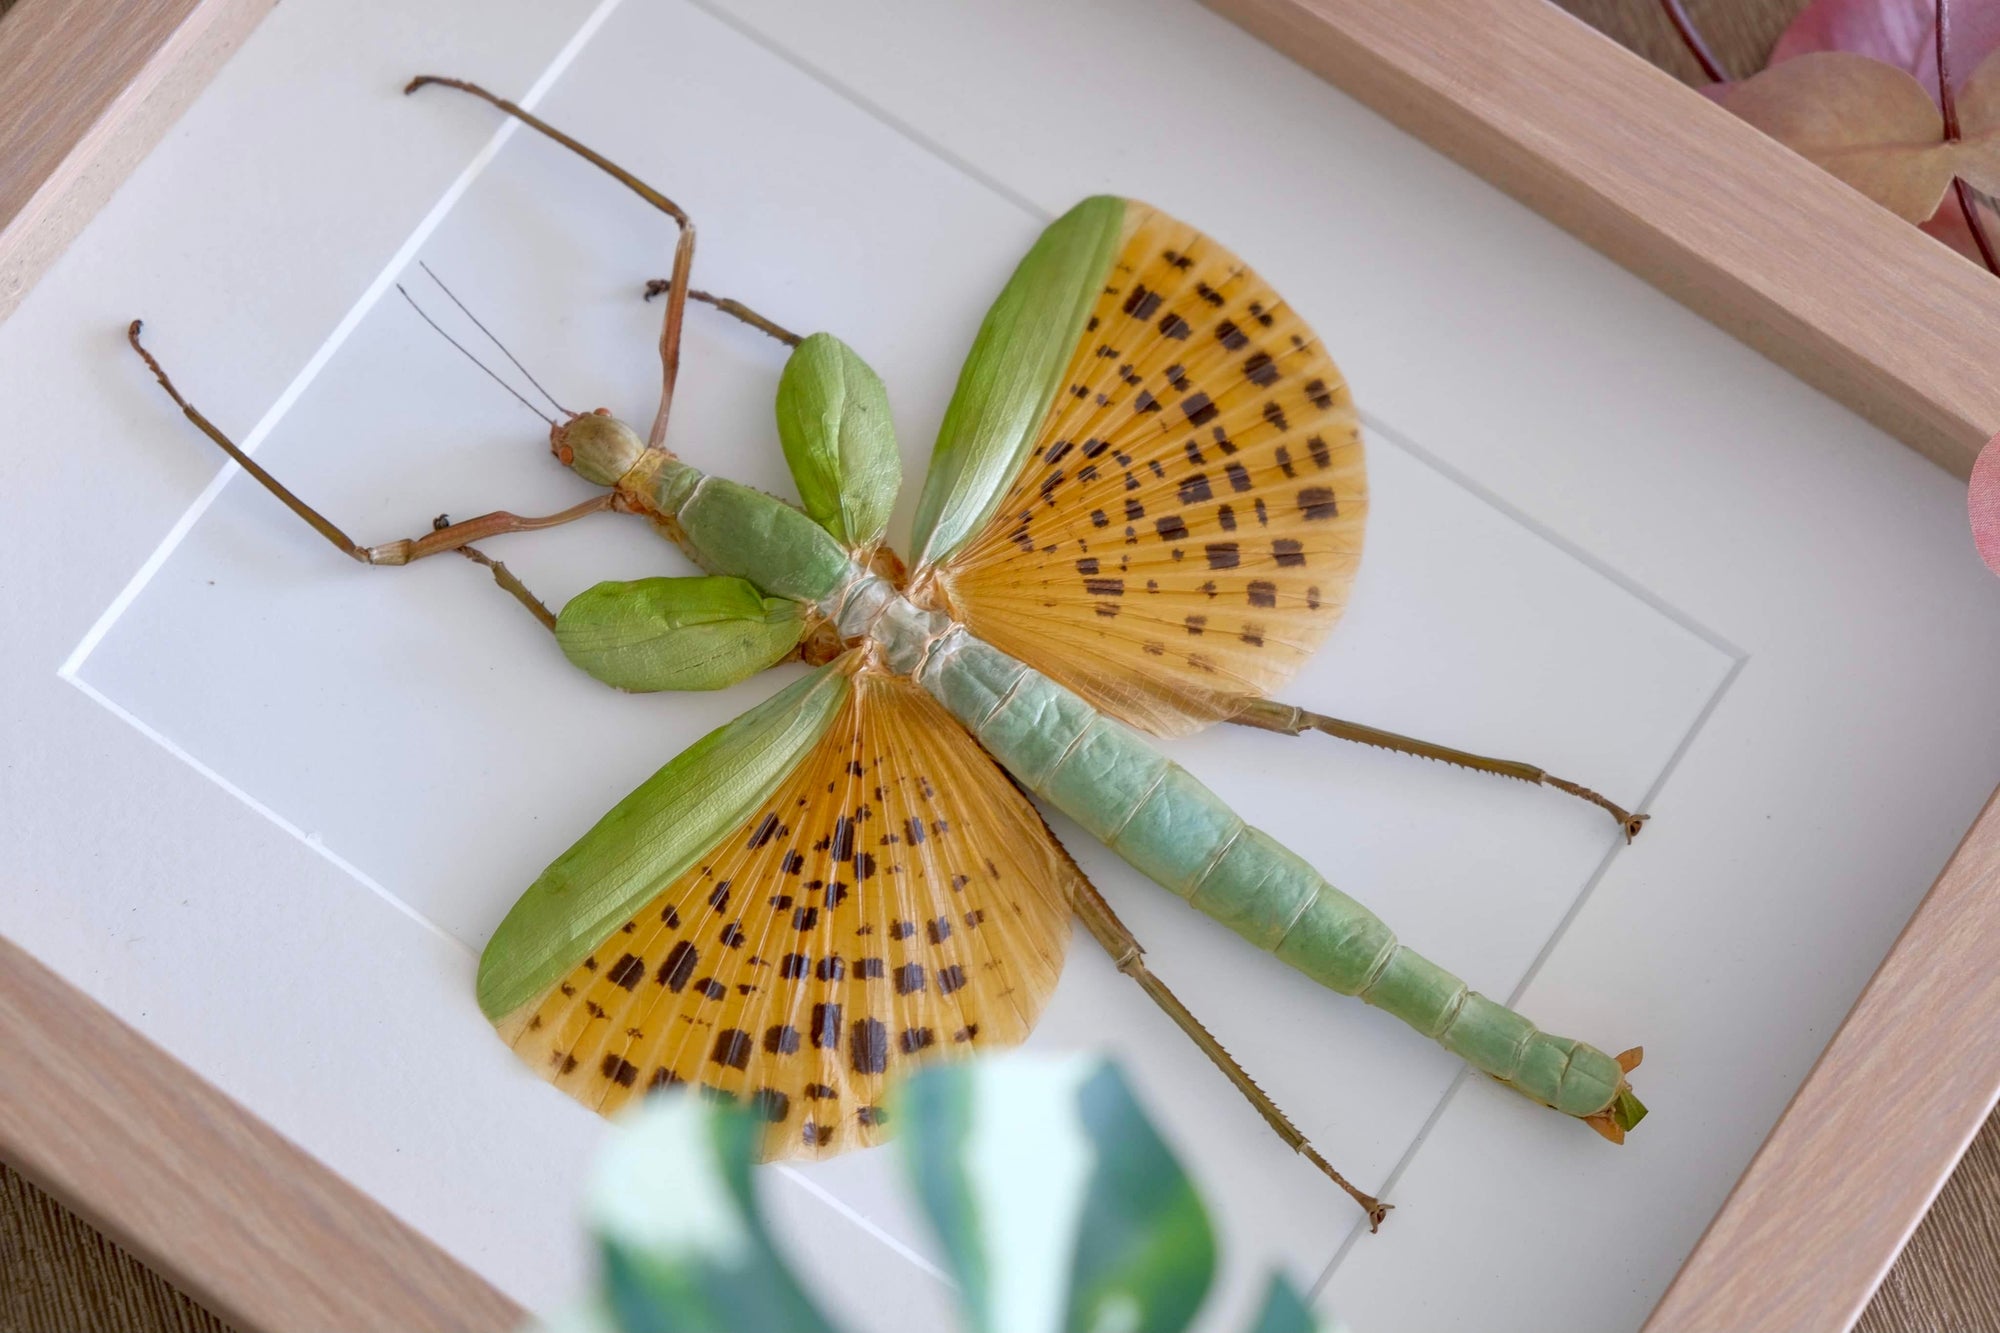 Leaf Insects, Stick Insects, Grasshoppers, Mantises & Crickets